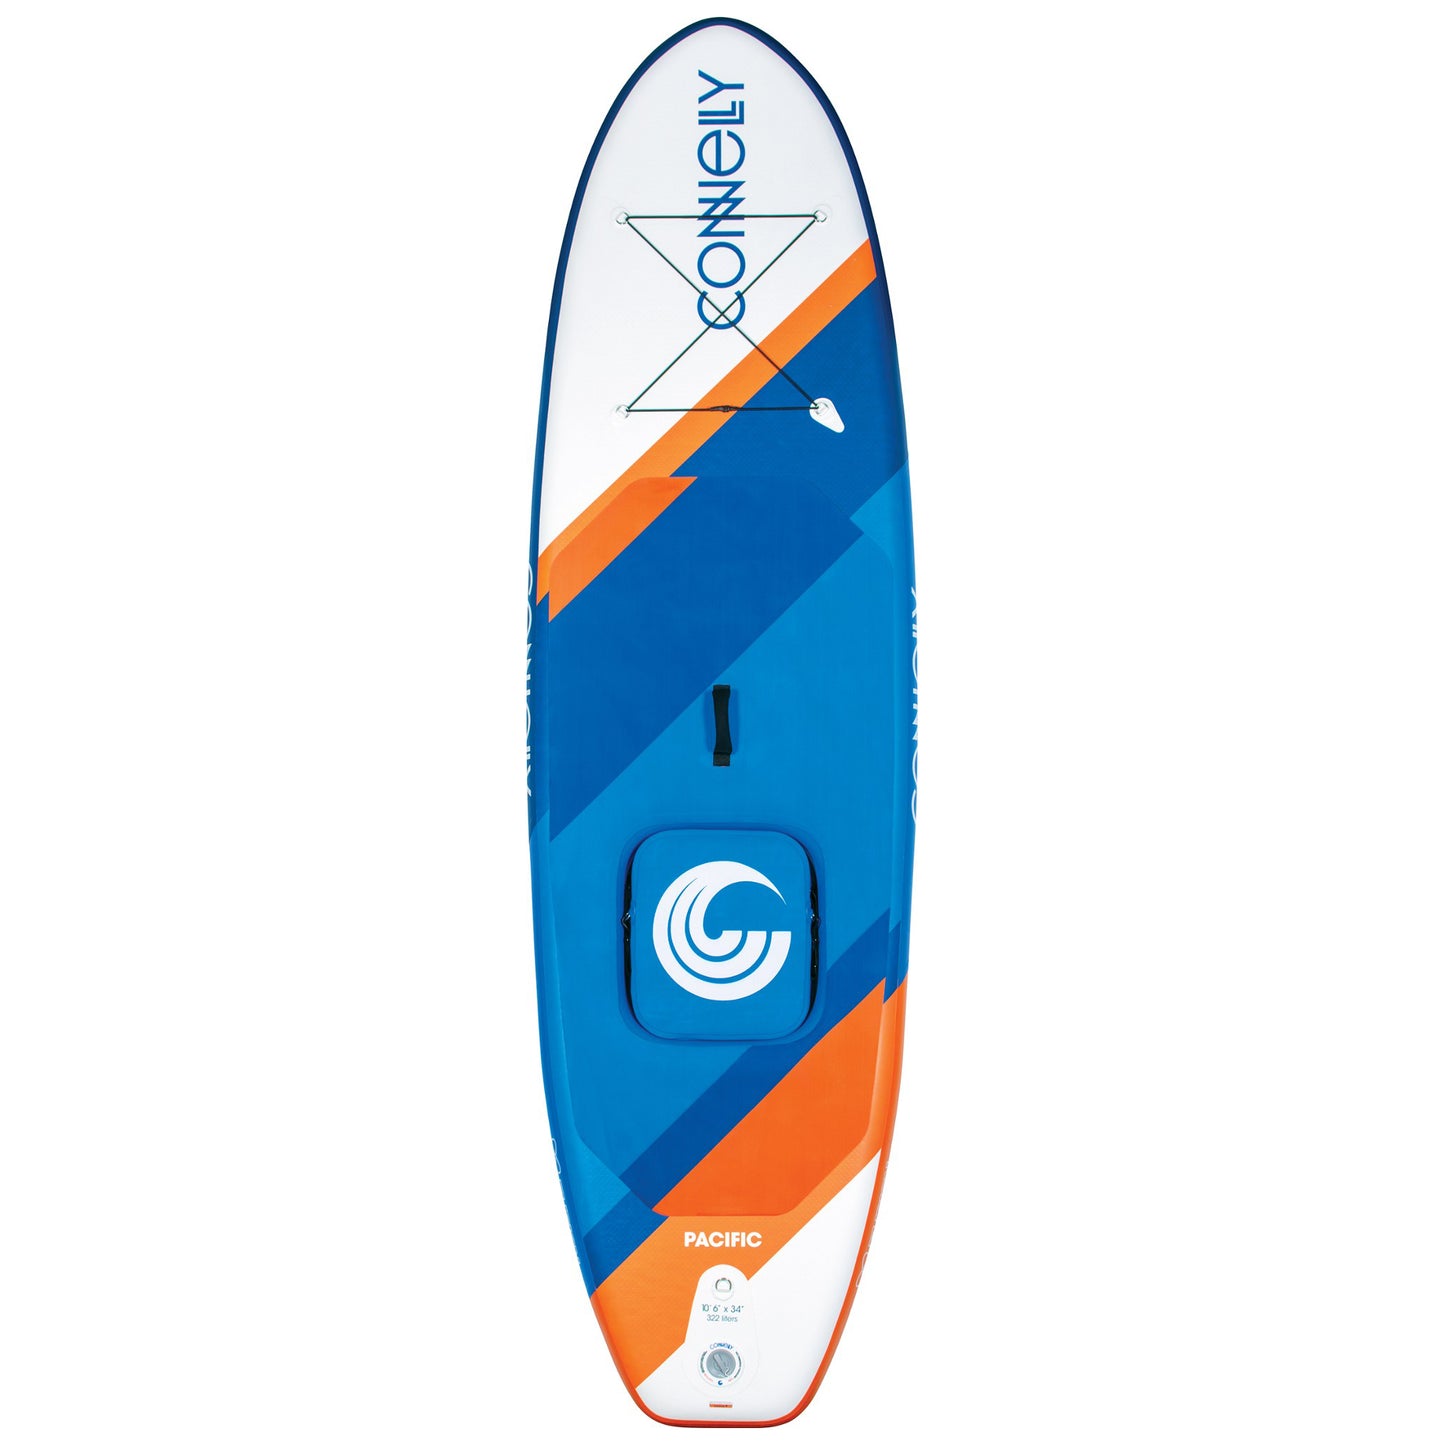 Pacific Inflatable Standup Paddleboard- 10'6"